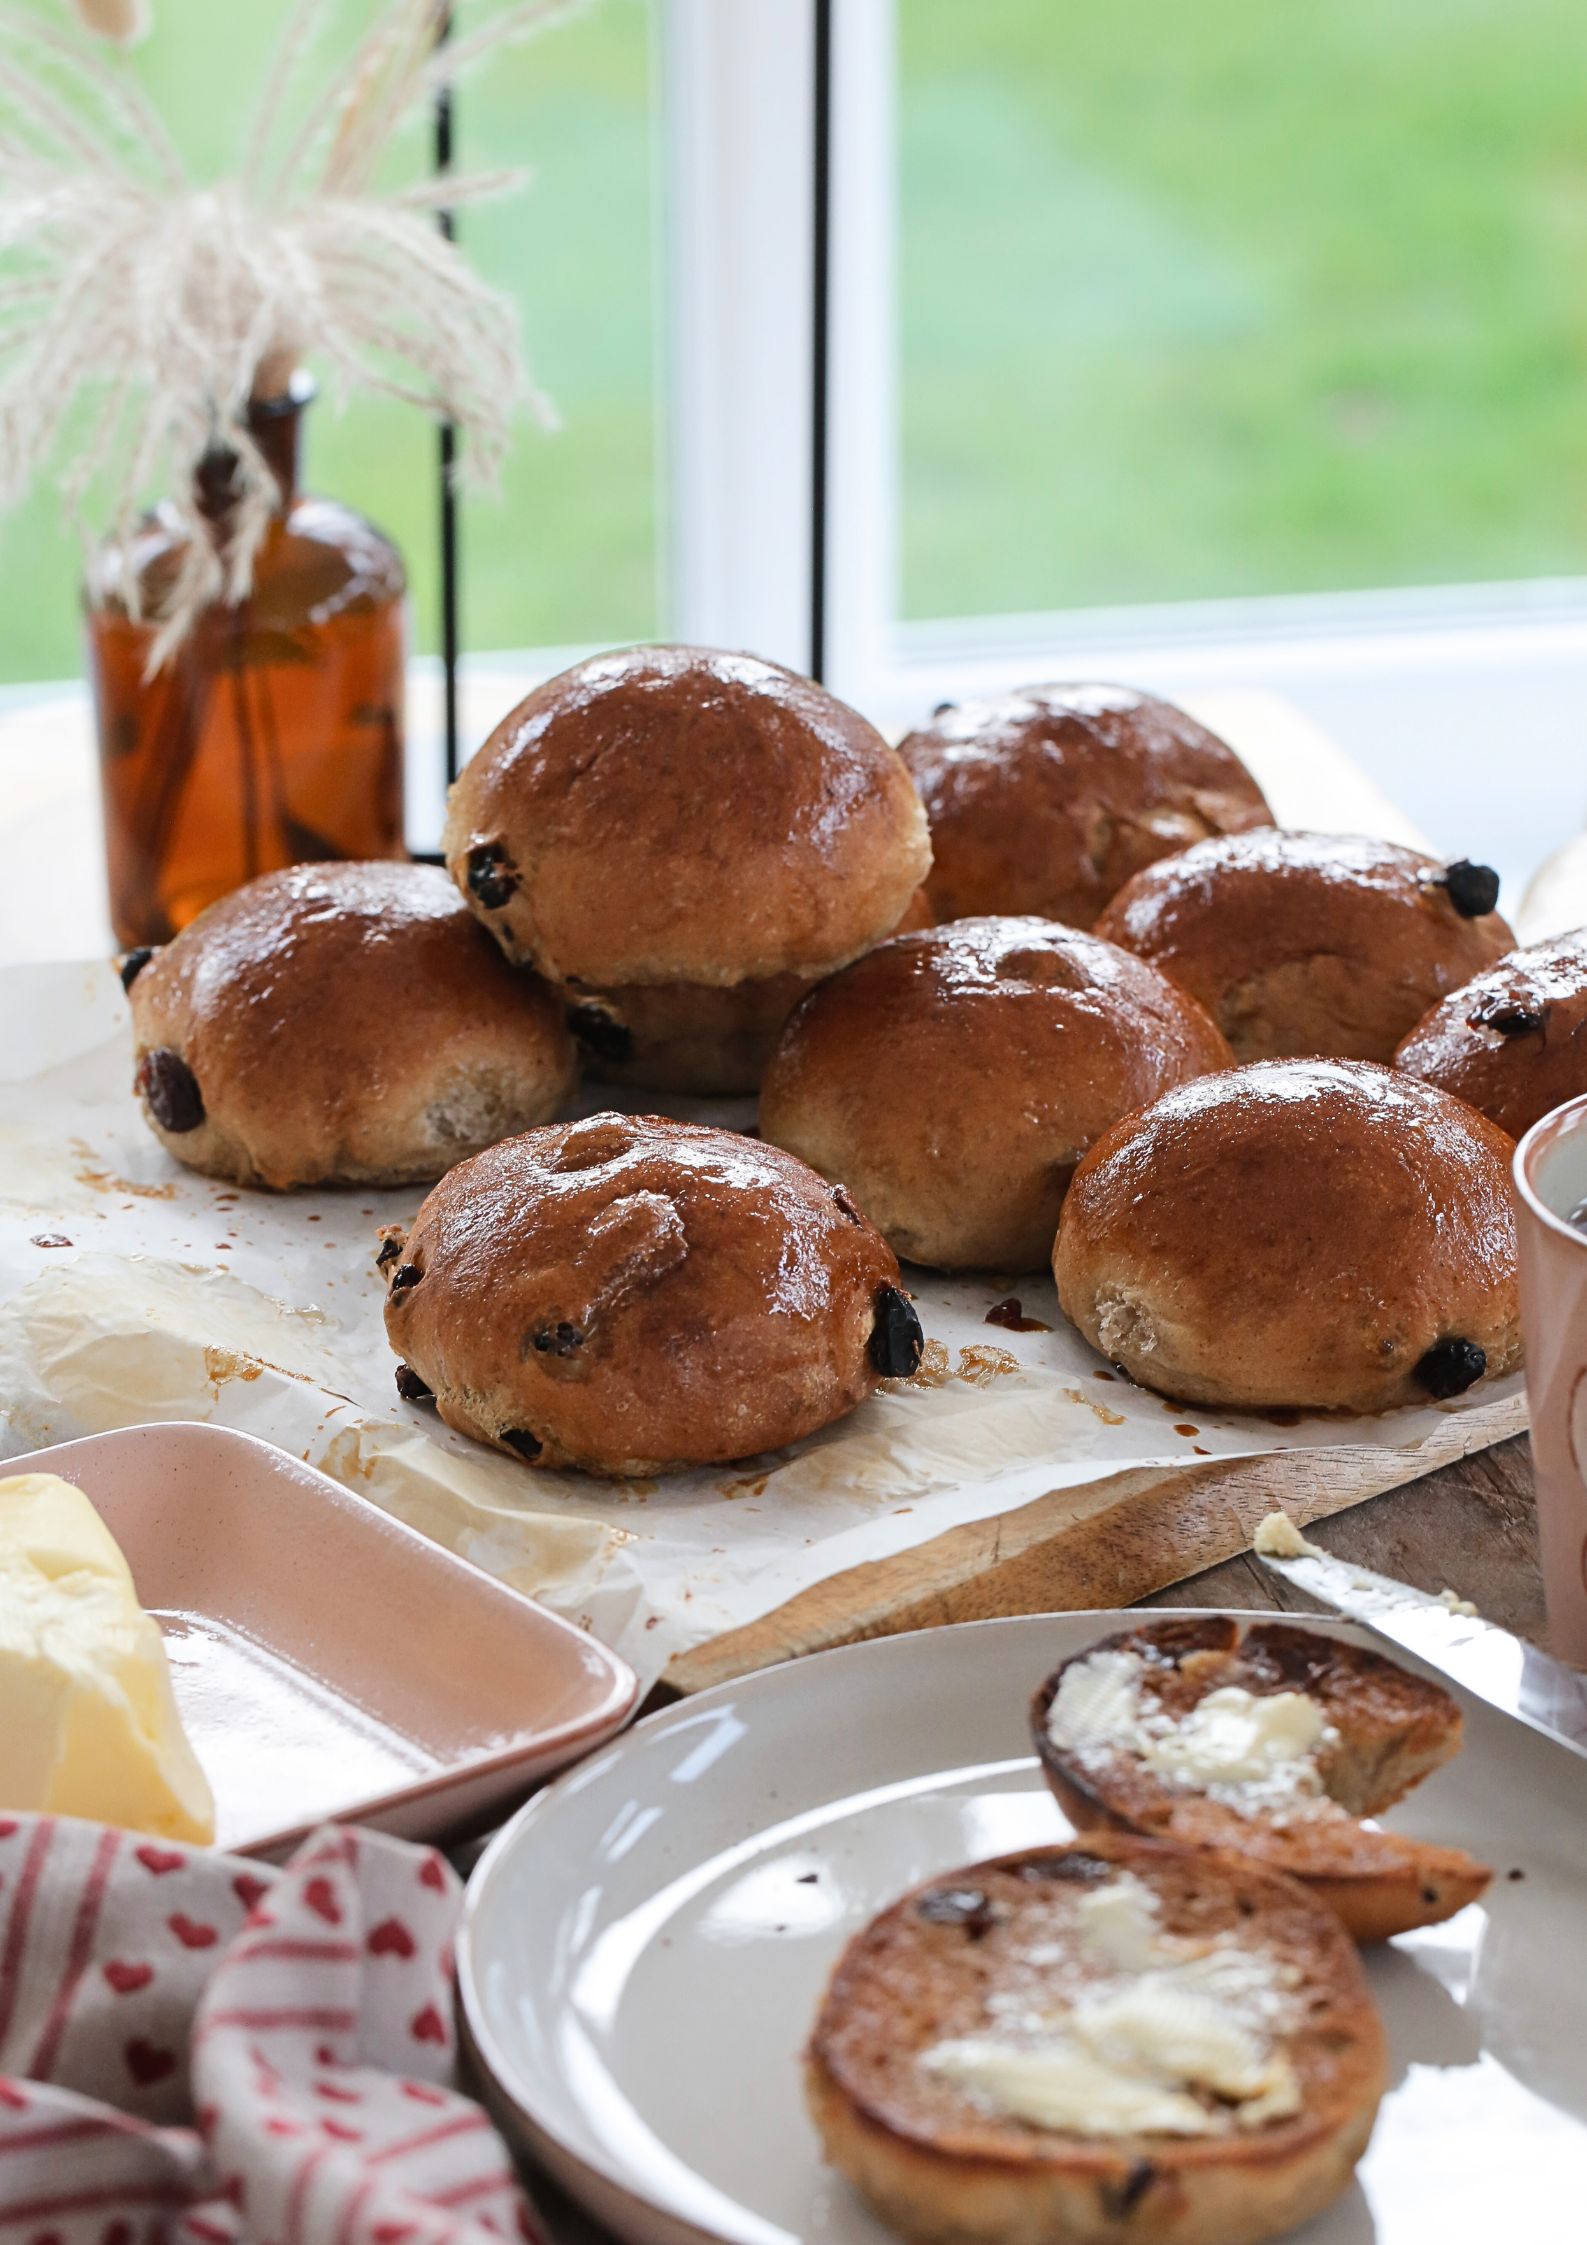 An old fashioned English teacake recipe that is so easy to recreate at home. These delicious vegan fruit teacakes are lightly spiced sweet buns, best enjoyed toasted with lashings of butter #Teacakes #AfternoonTea #Baking #Vegan